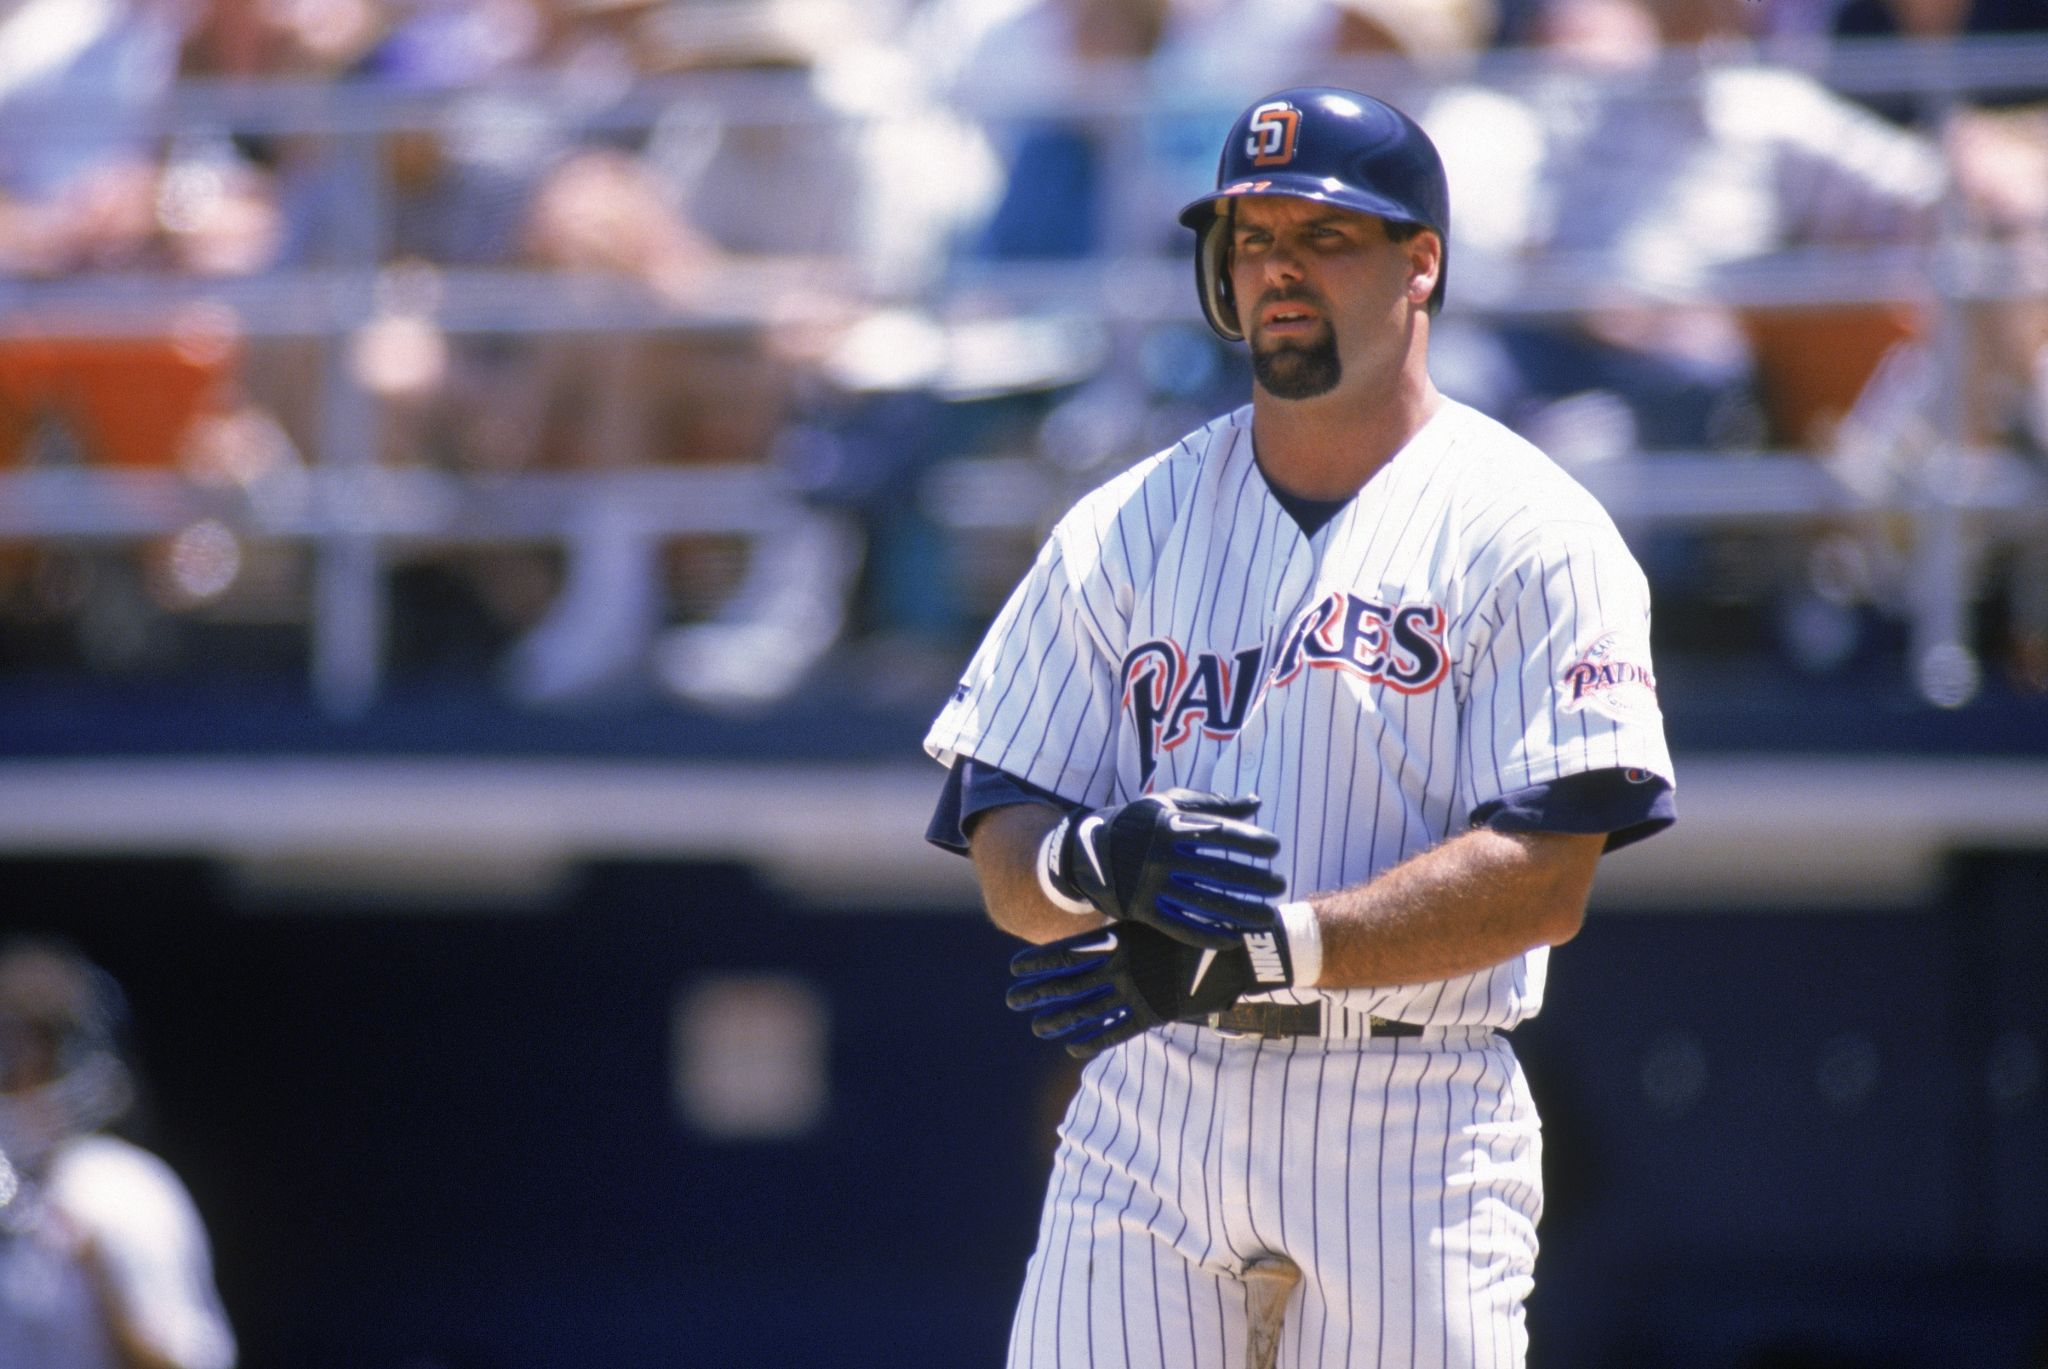 Q&A with Dan Good, author of new book on Ken Caminiti - The San